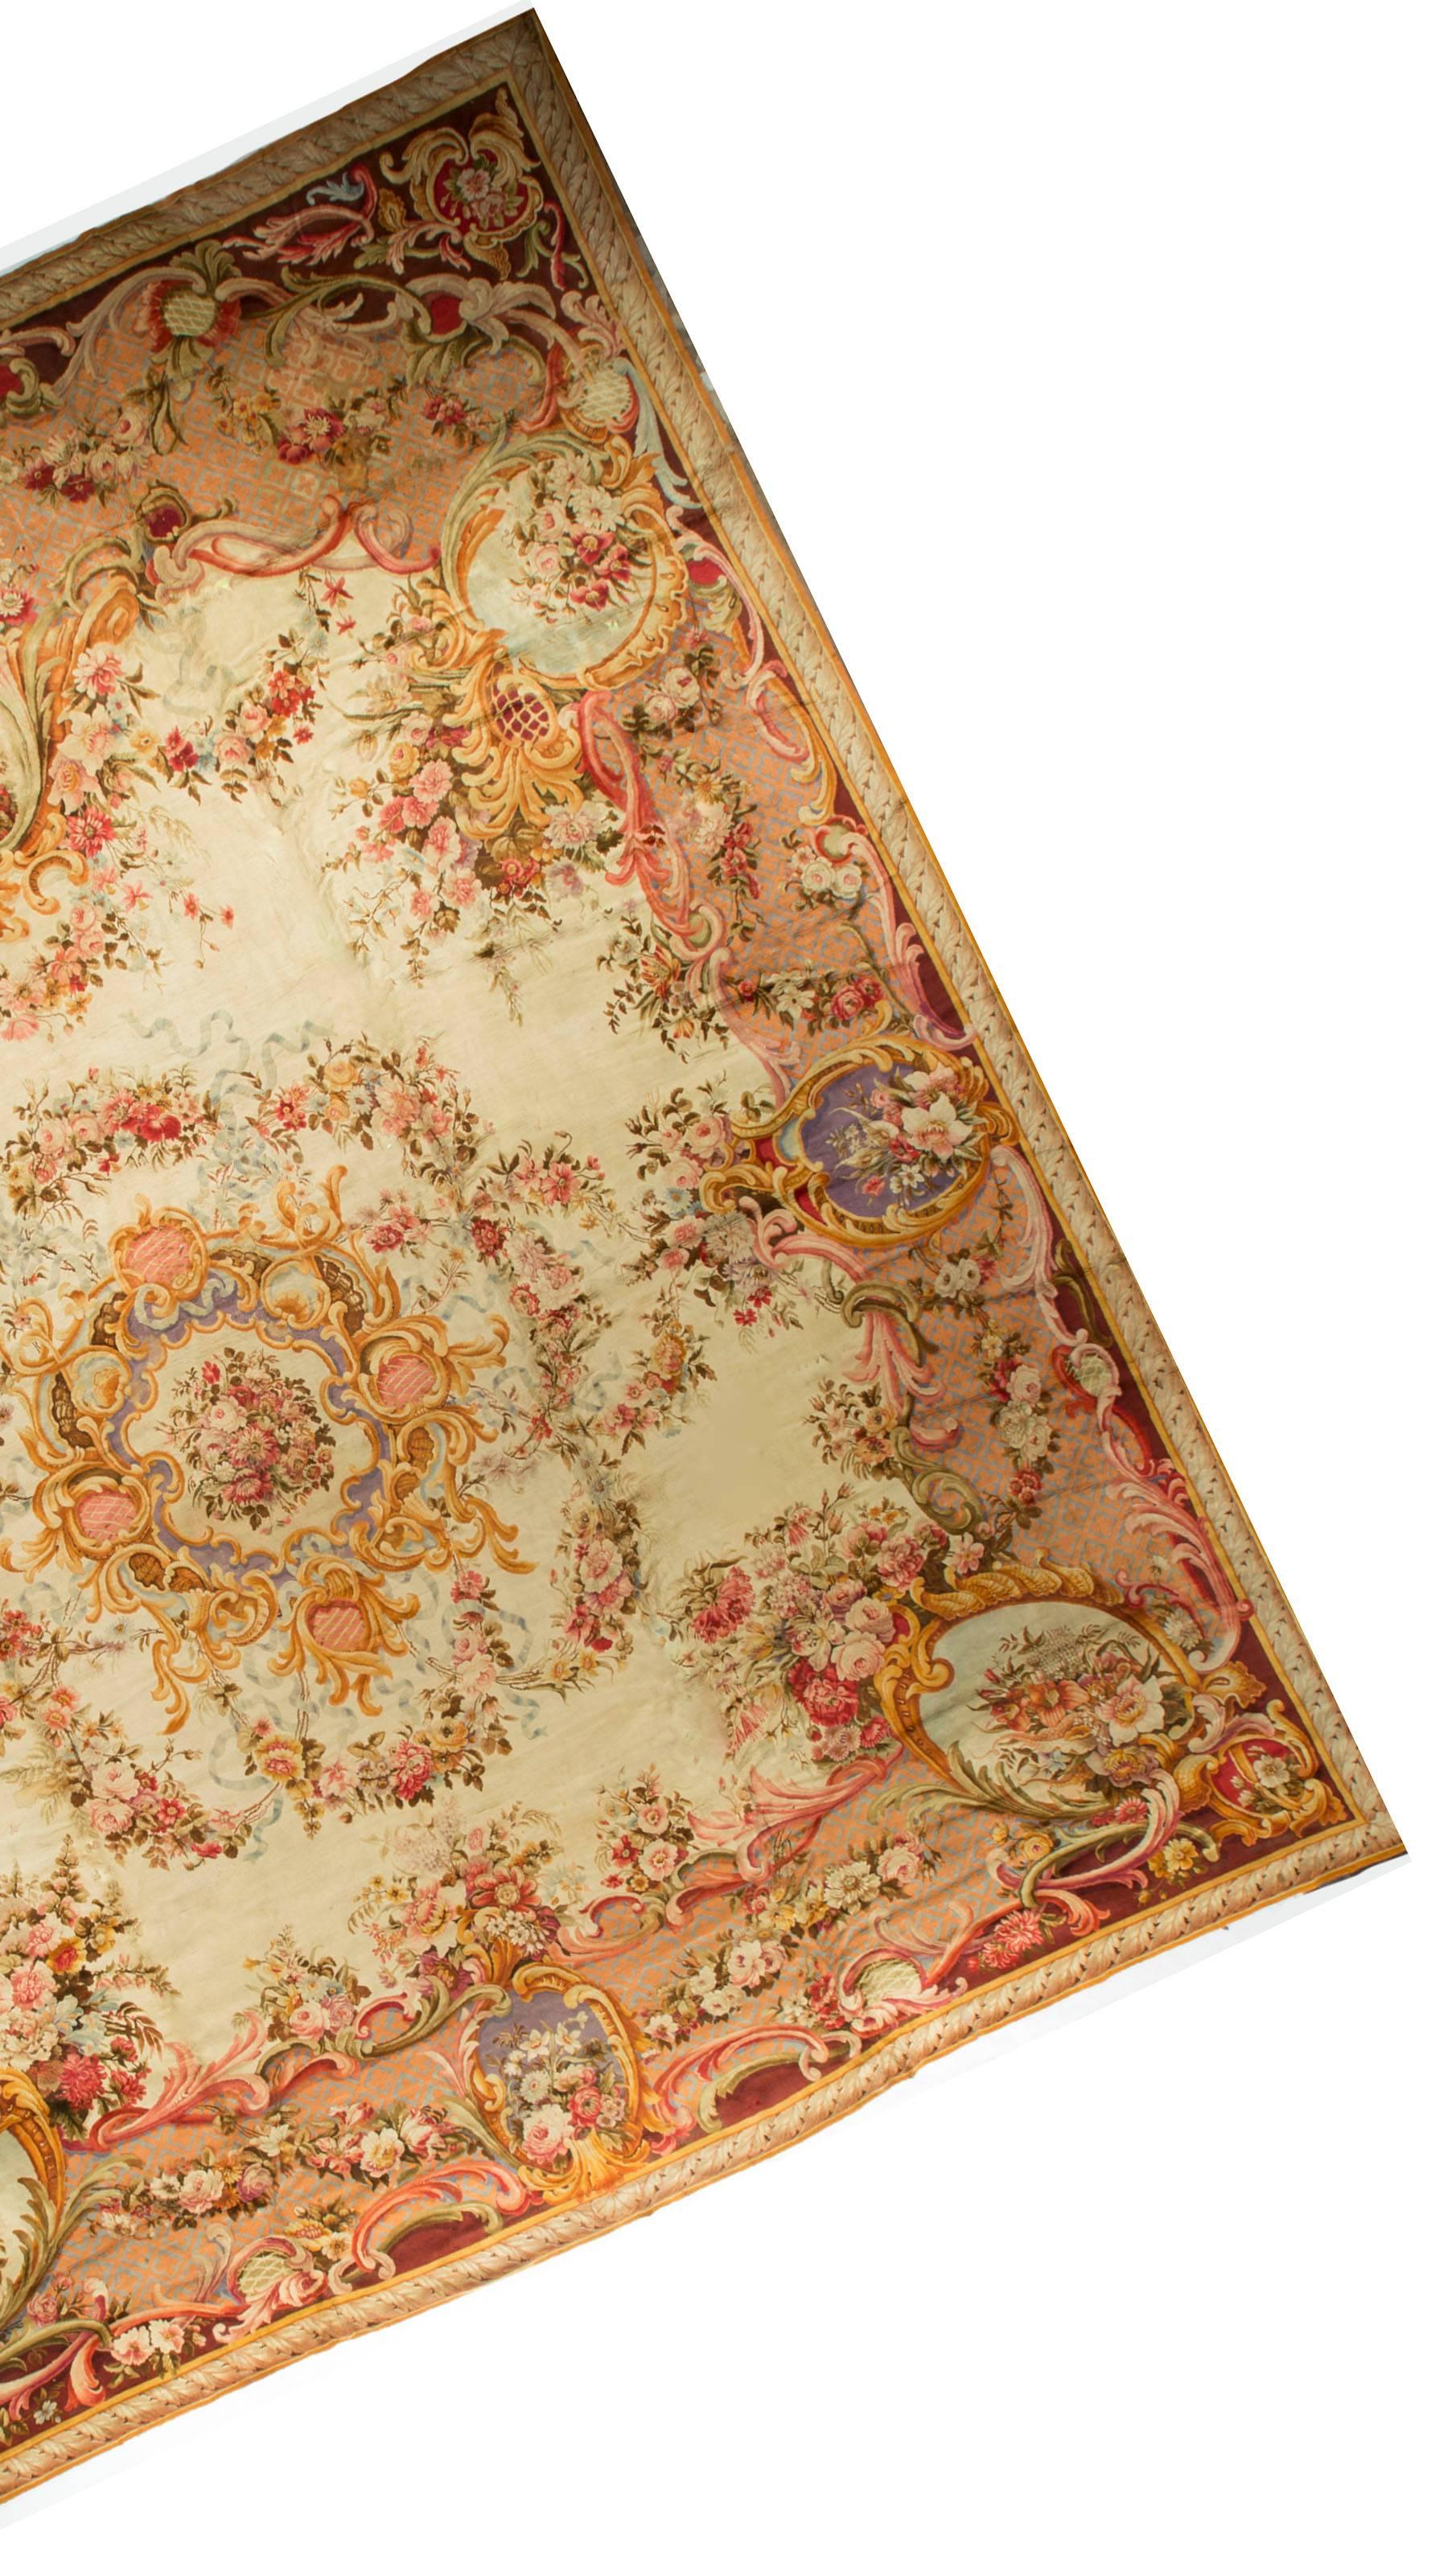 French Savonnerie carpets have been produced since the 1600s. The name comes from the French word for soap, 'savon' as they were produced in an area where soap factories were based. The designs are mainly, pictorial or armorial and the rugs are